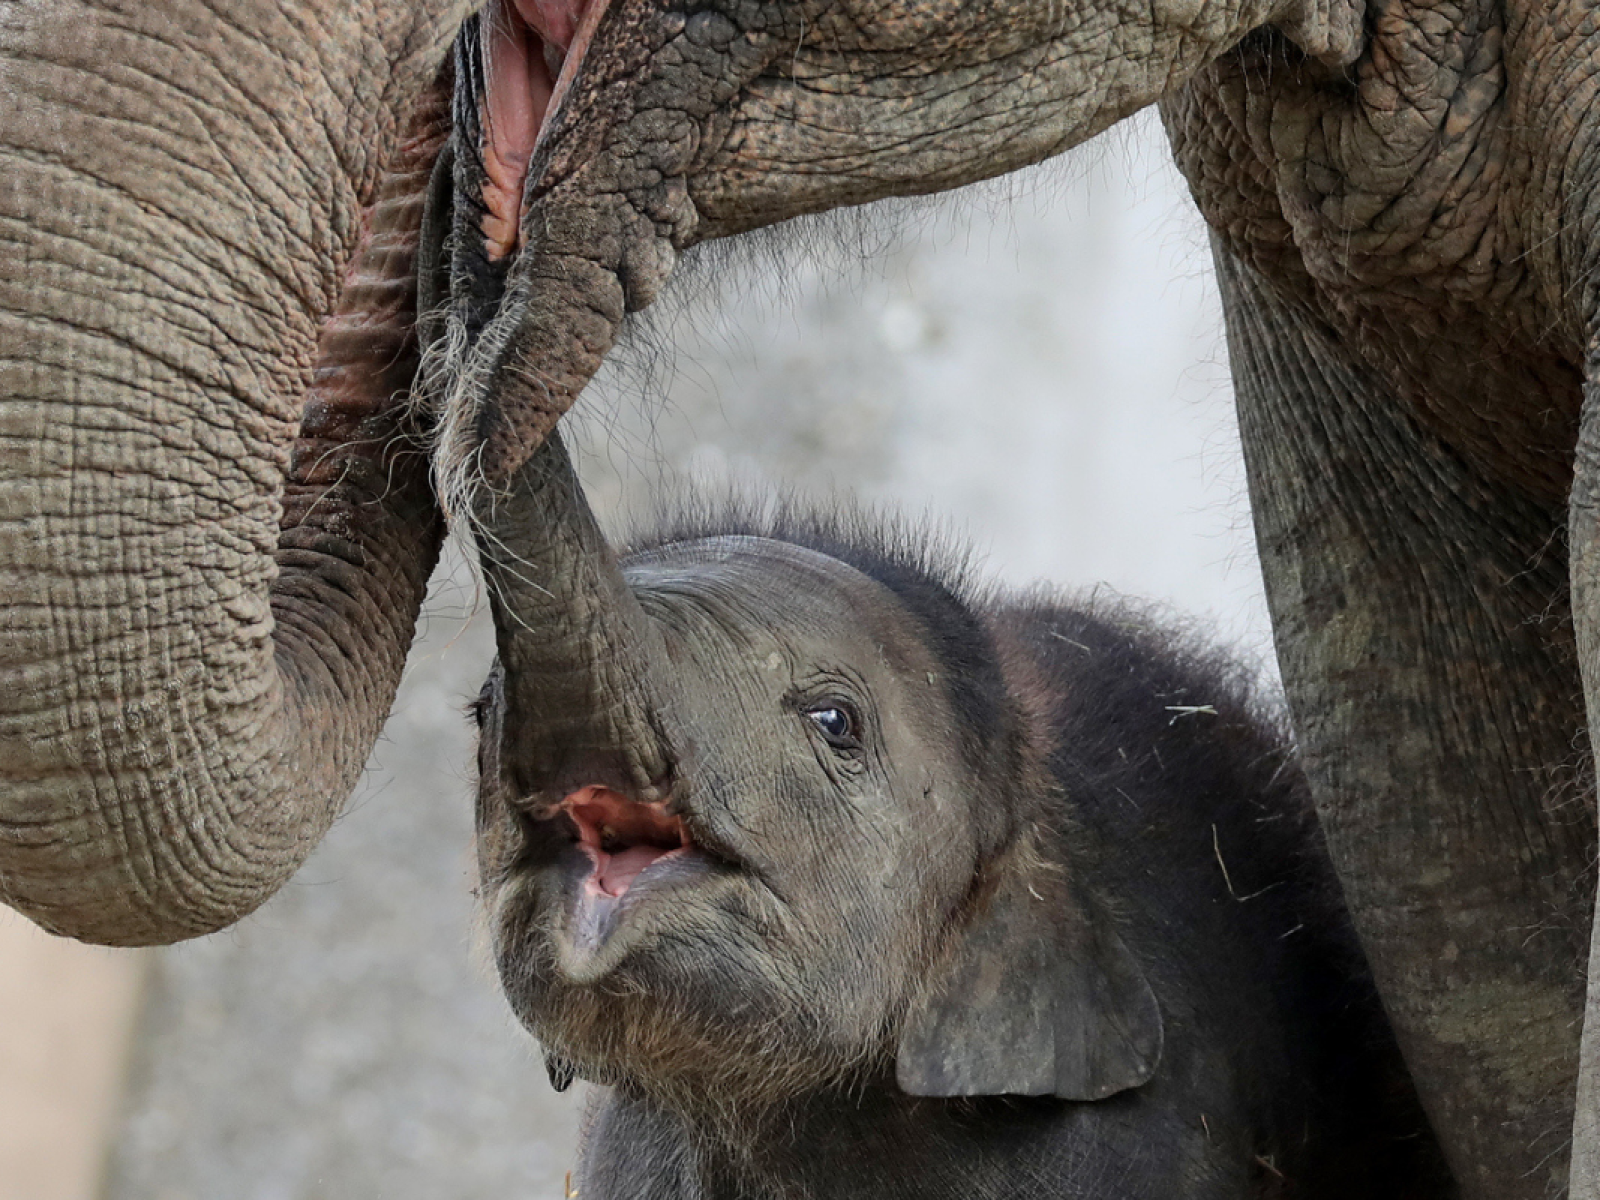 Baby Elephant Too Short to Drink From Mom Given Stool: 'Precious